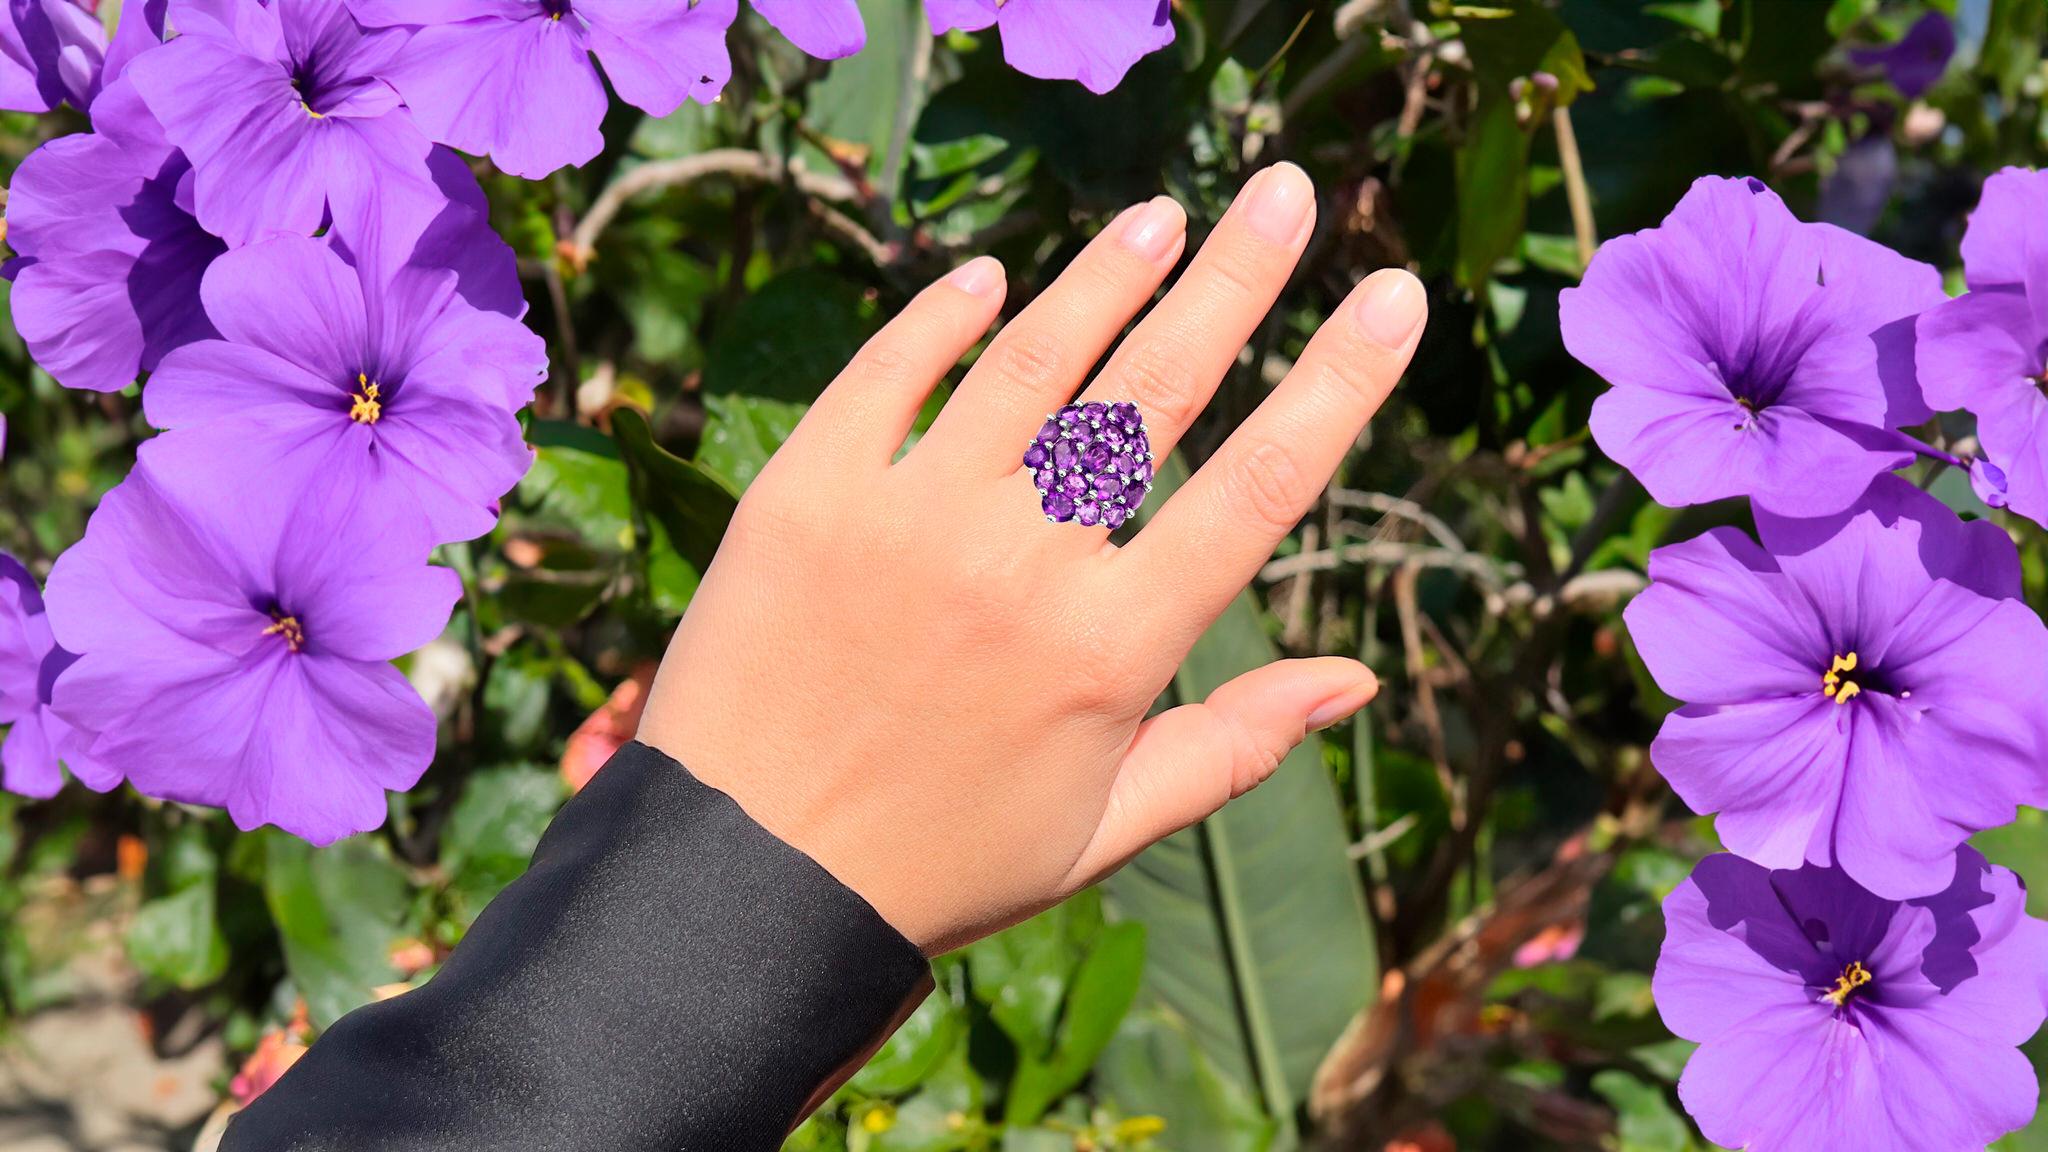 It comes with the appraisal by GIA GG/AJP
Amethyst = 5.50 Carats
Cut: Oval & Round
Metal: Sterling Silver
Rhodium Plated
Height: 7.50 mm
Width: 18 mm
Length: 24.5 mm
Ring Size: 6.75* US
*It can be resized complimentary